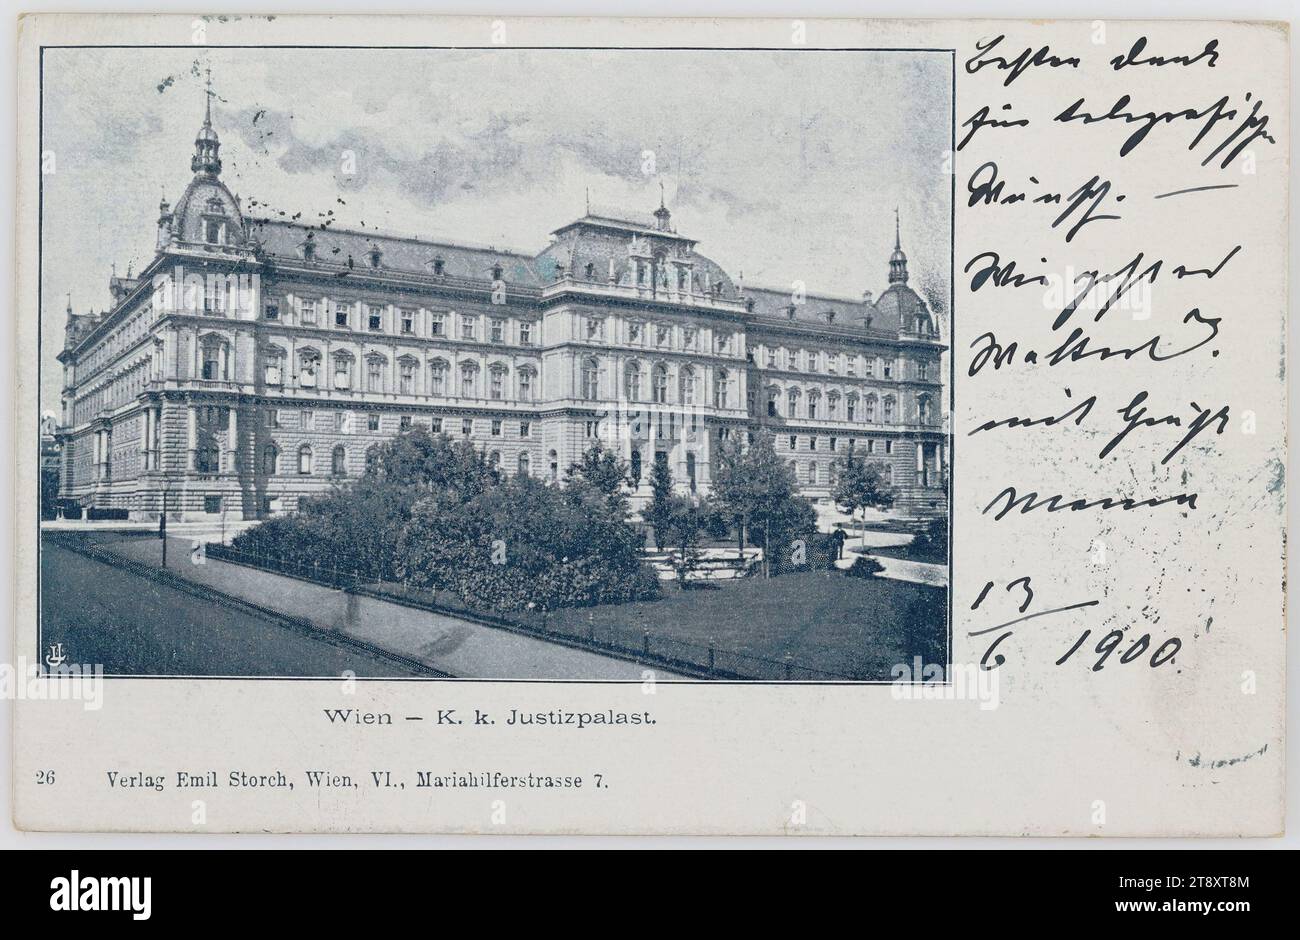 Vienna - K. k. Justice Palace, Emil Storch, Producer, 1900, coated paperboard, halftone print, Inscription, FROM, Vienna, TO, Vienna, ADDRESS, HW Frau, Cottagegasse N 45 Villa Dolfi, Döbling, MESSAGE, Best thanks, for telegraphic, wish. -How are you, Walter, with greetings, 13, 6 1900, Law and Justice, Media and Communication, Postcards with transliteration, 1st District: Innere Stadt, handwriting, written text, Schmerlingplatz, The Vienna Collection Stock Photo